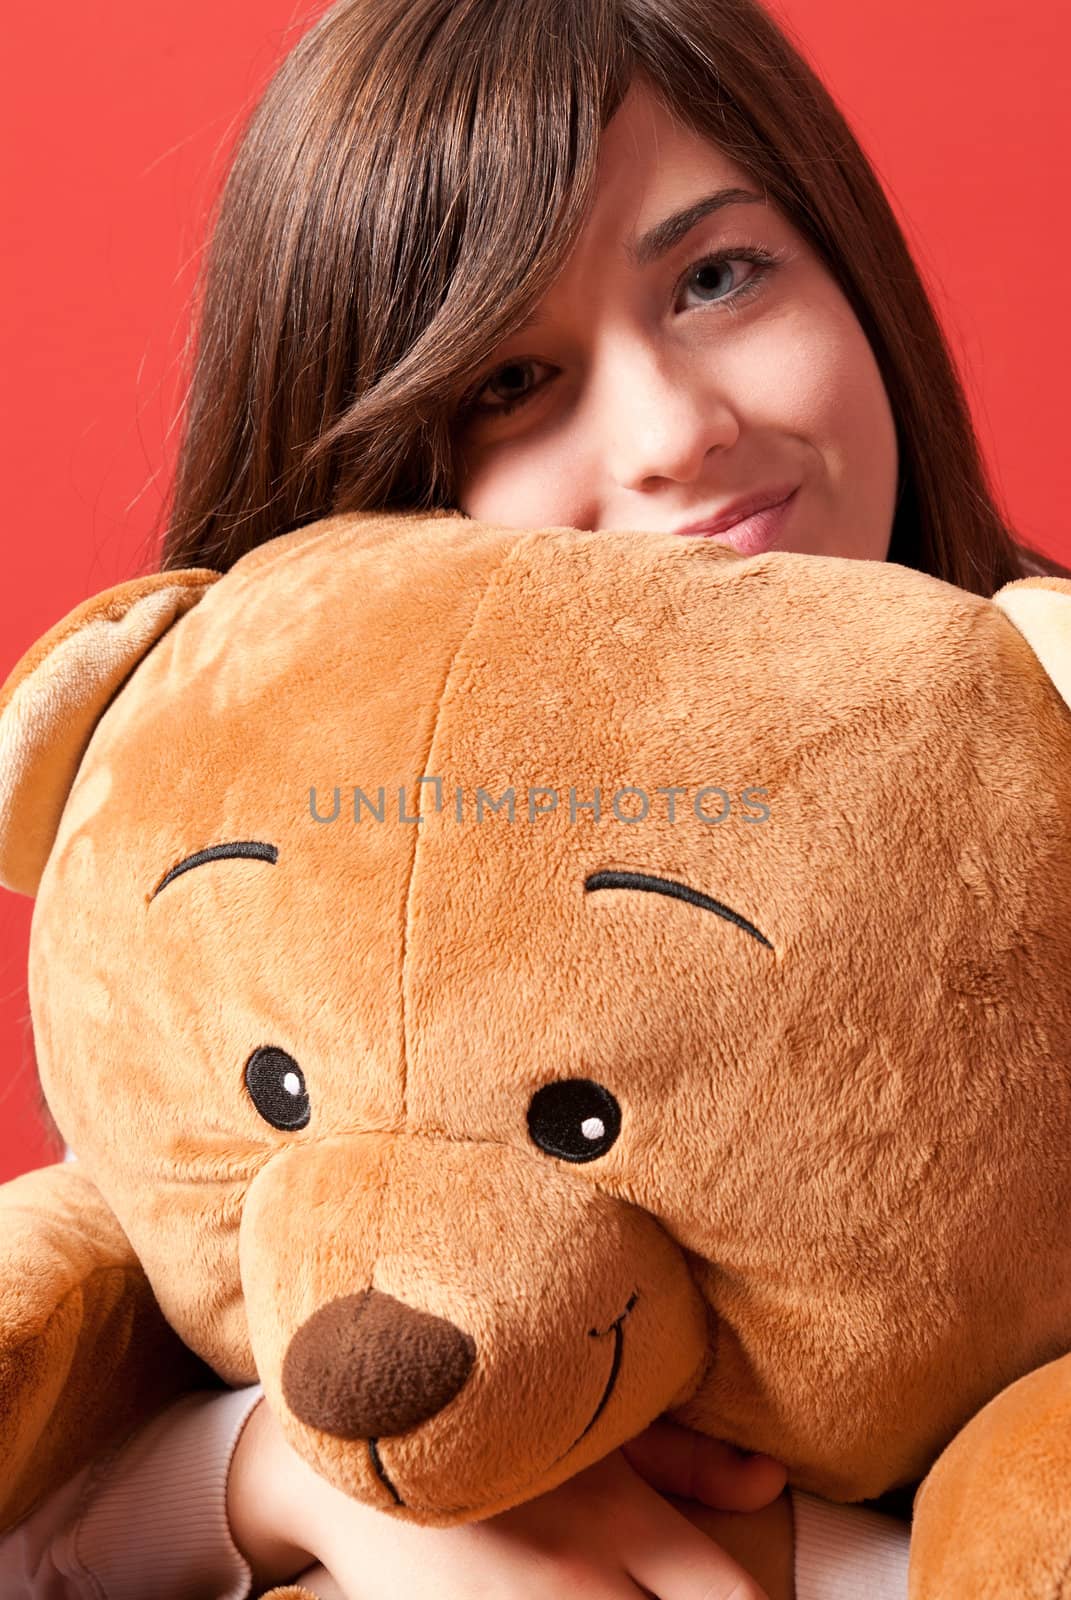 Young woman embracing teddy bear sitting close-up by dgmata